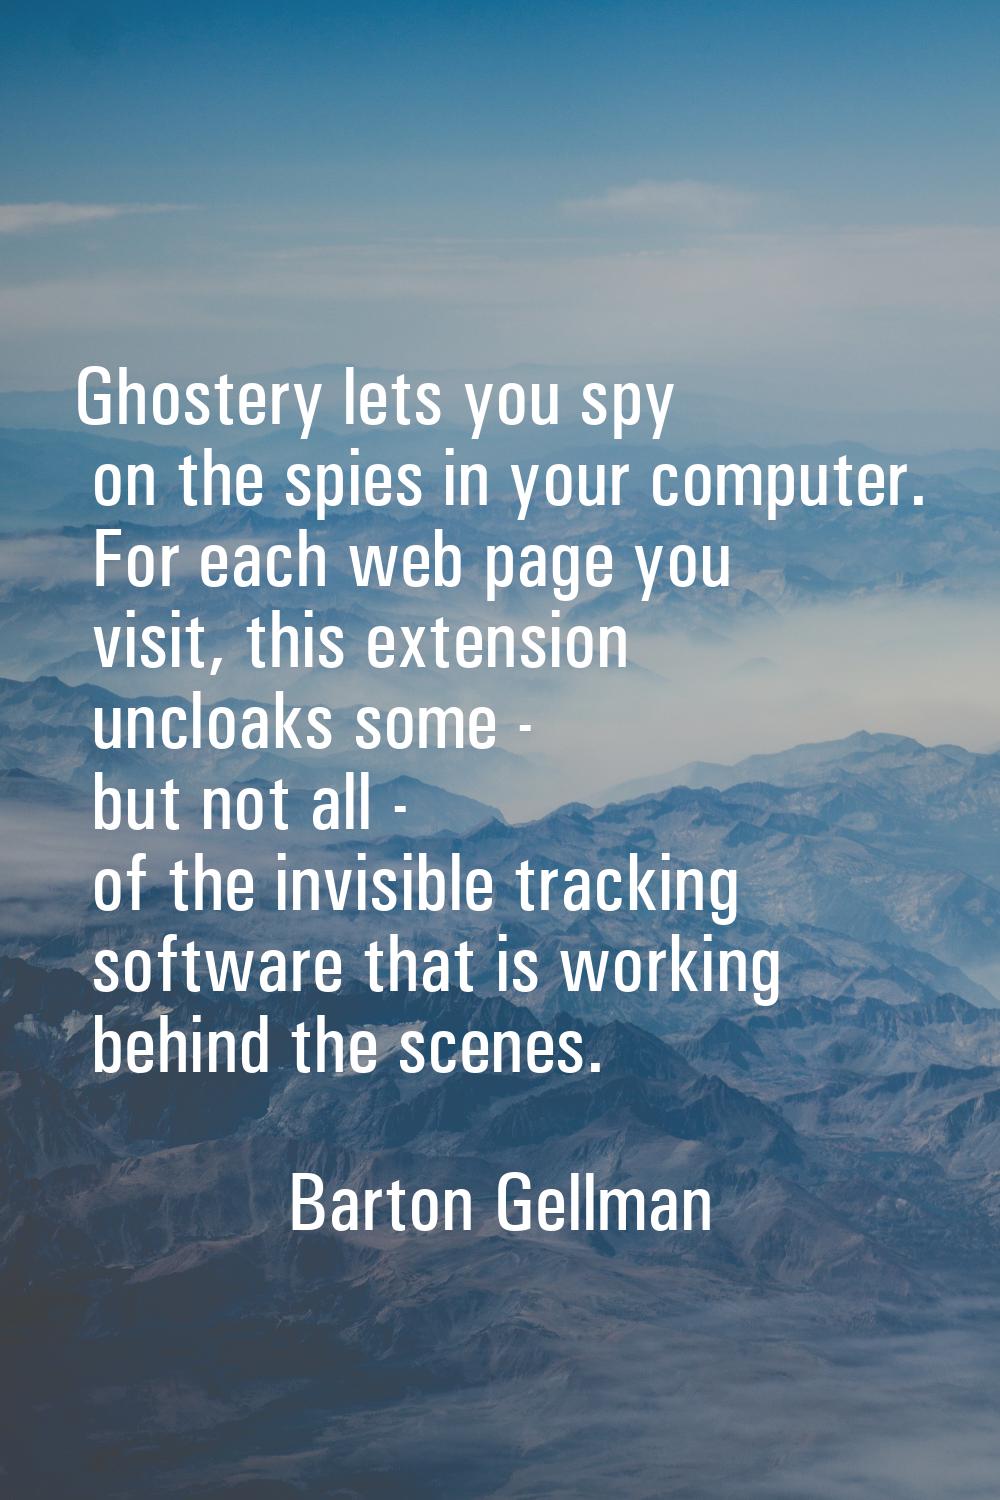 Ghostery lets you spy on the spies in your computer. For each web page you visit, this extension un